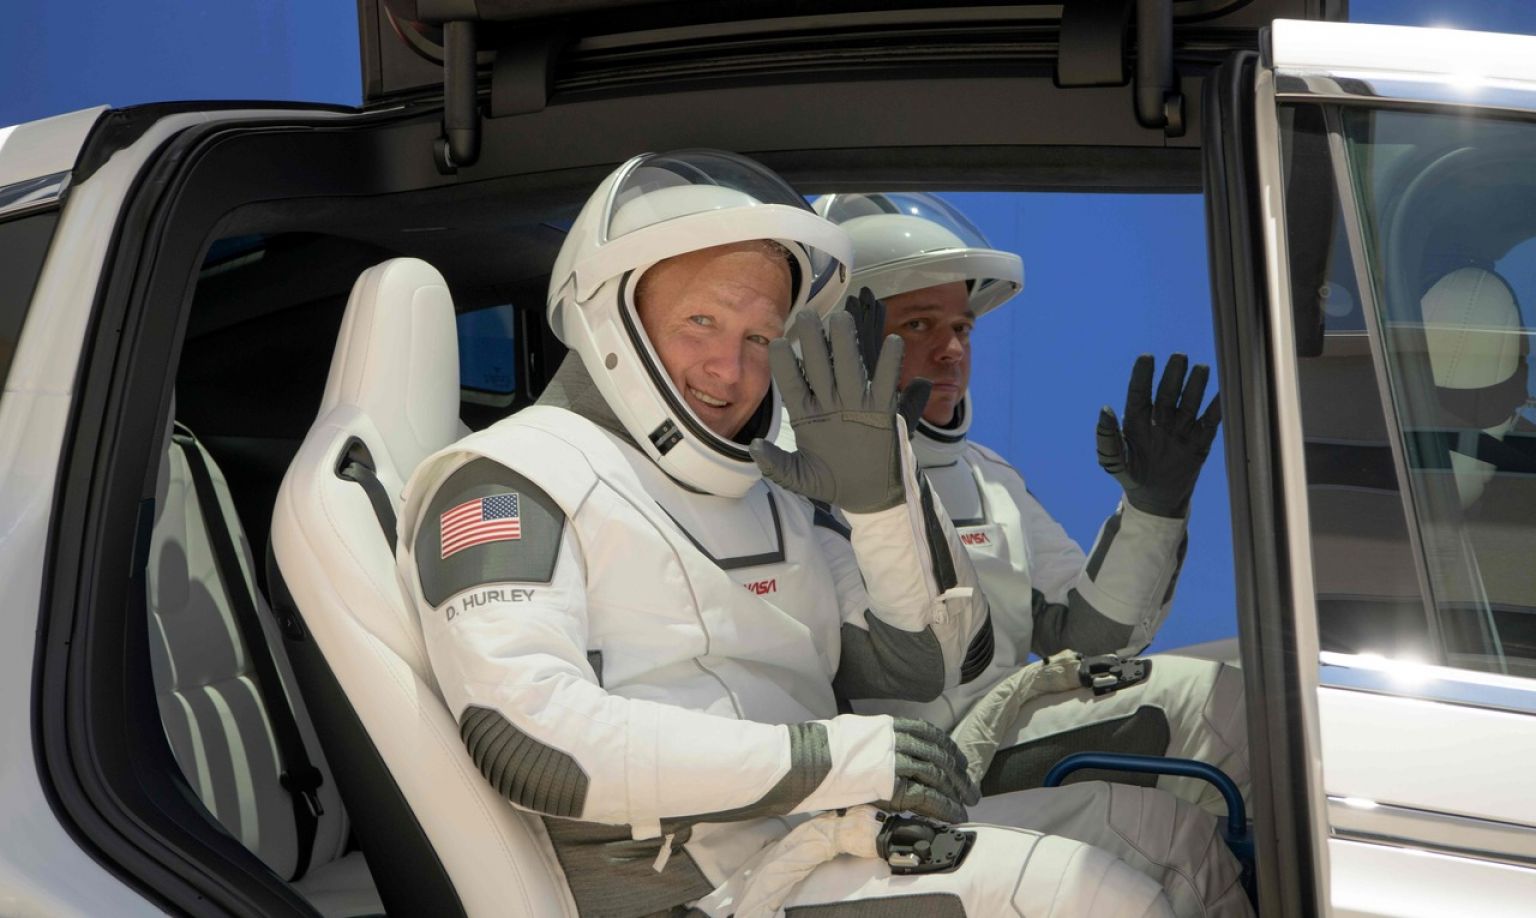 Elon Musk's SpaceX suit is like a tuxedo for the Starship Enterprise